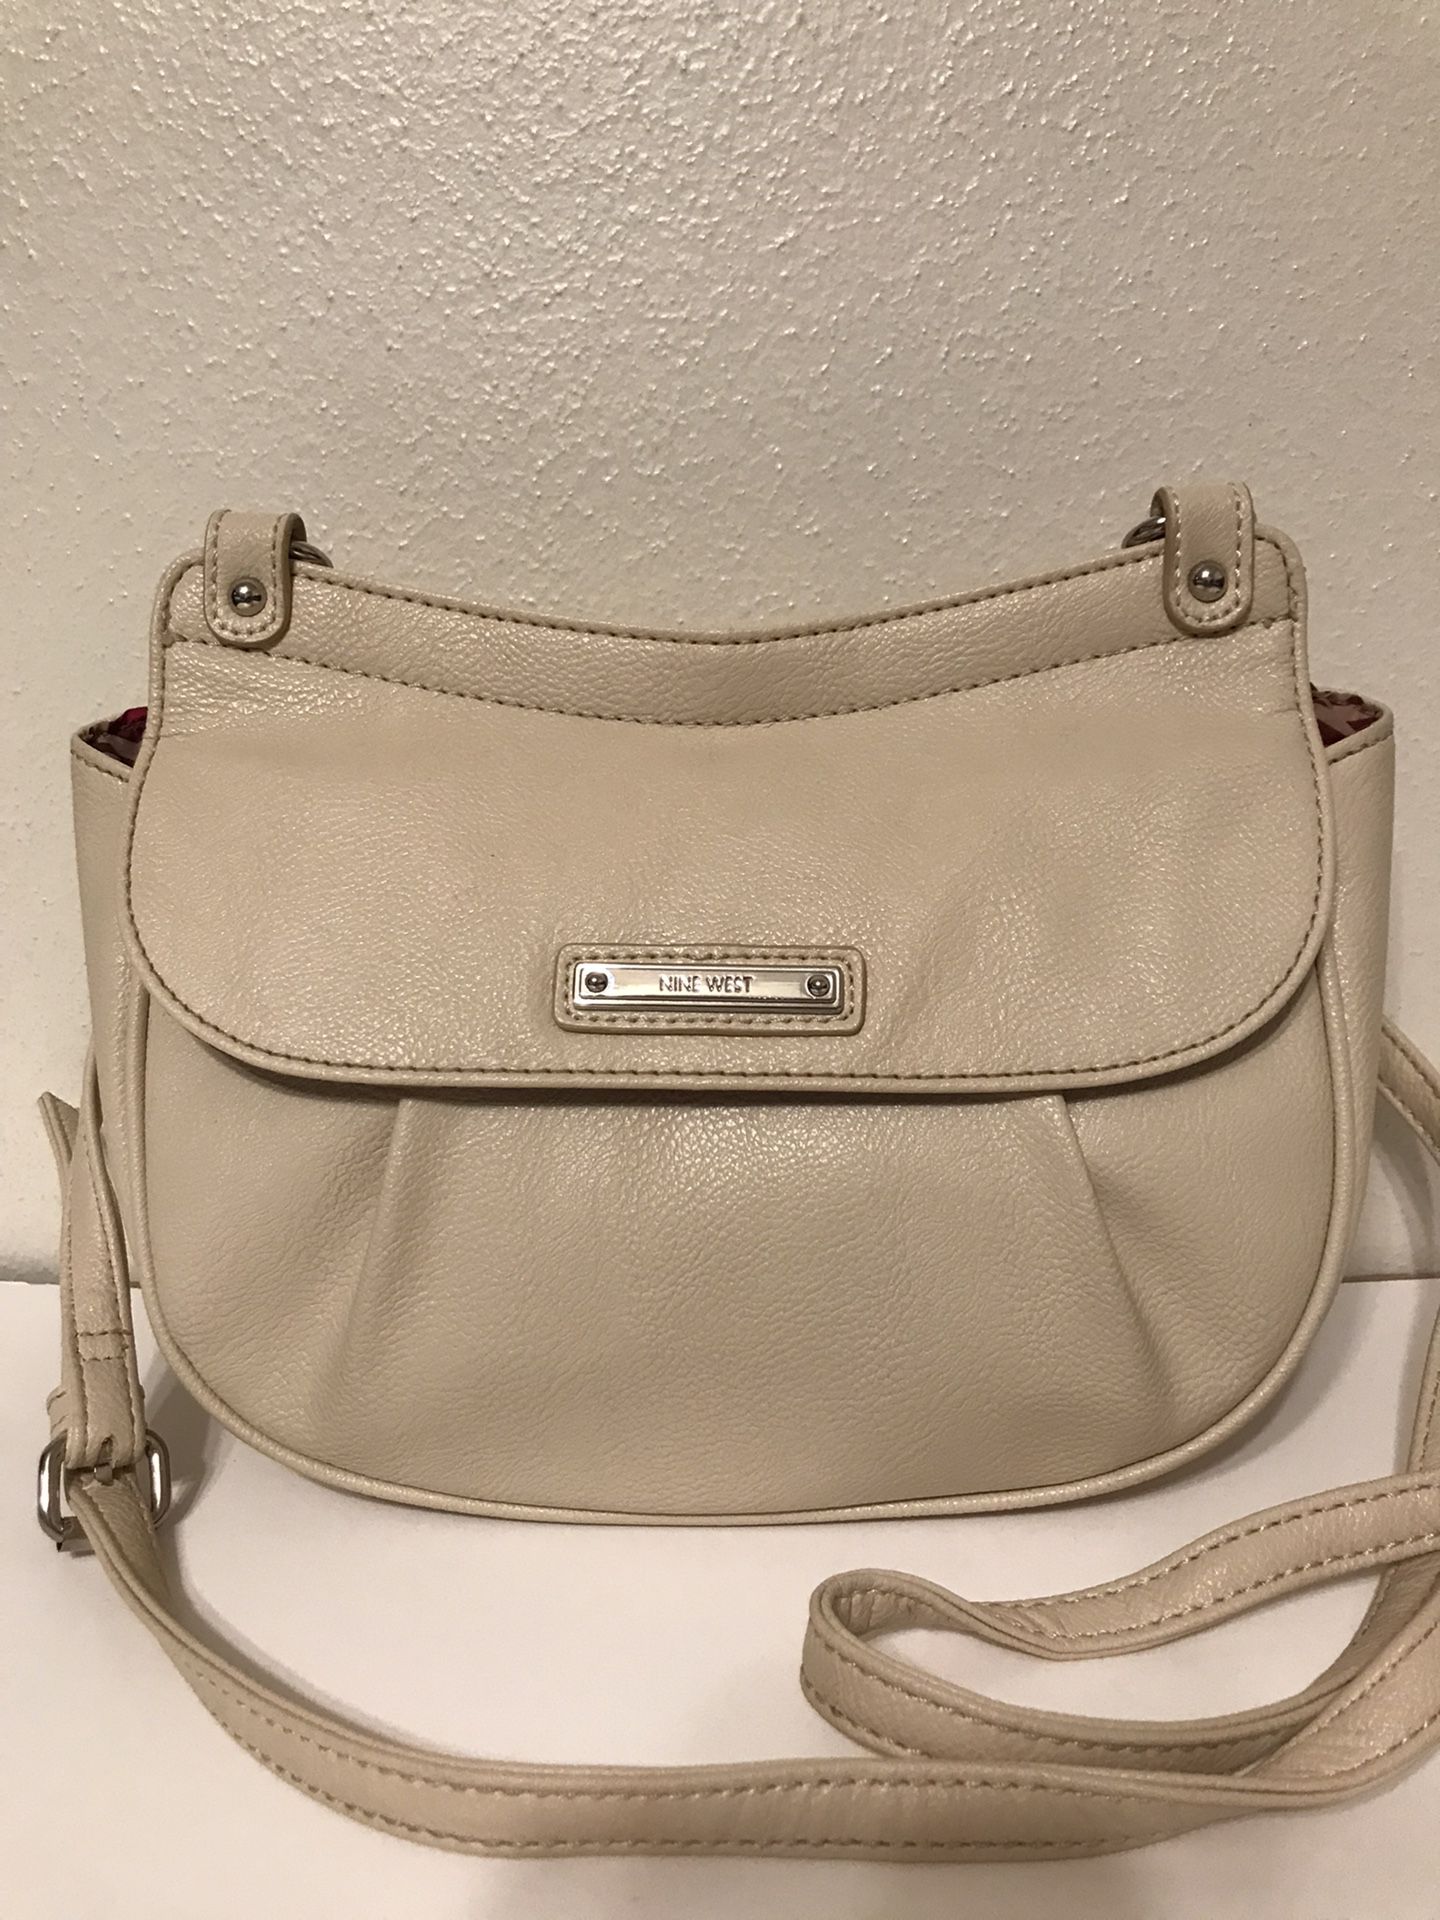 Nine West Cream Colored Faux Leather Small Crossbody Purse W/ Magnetic Flap Top